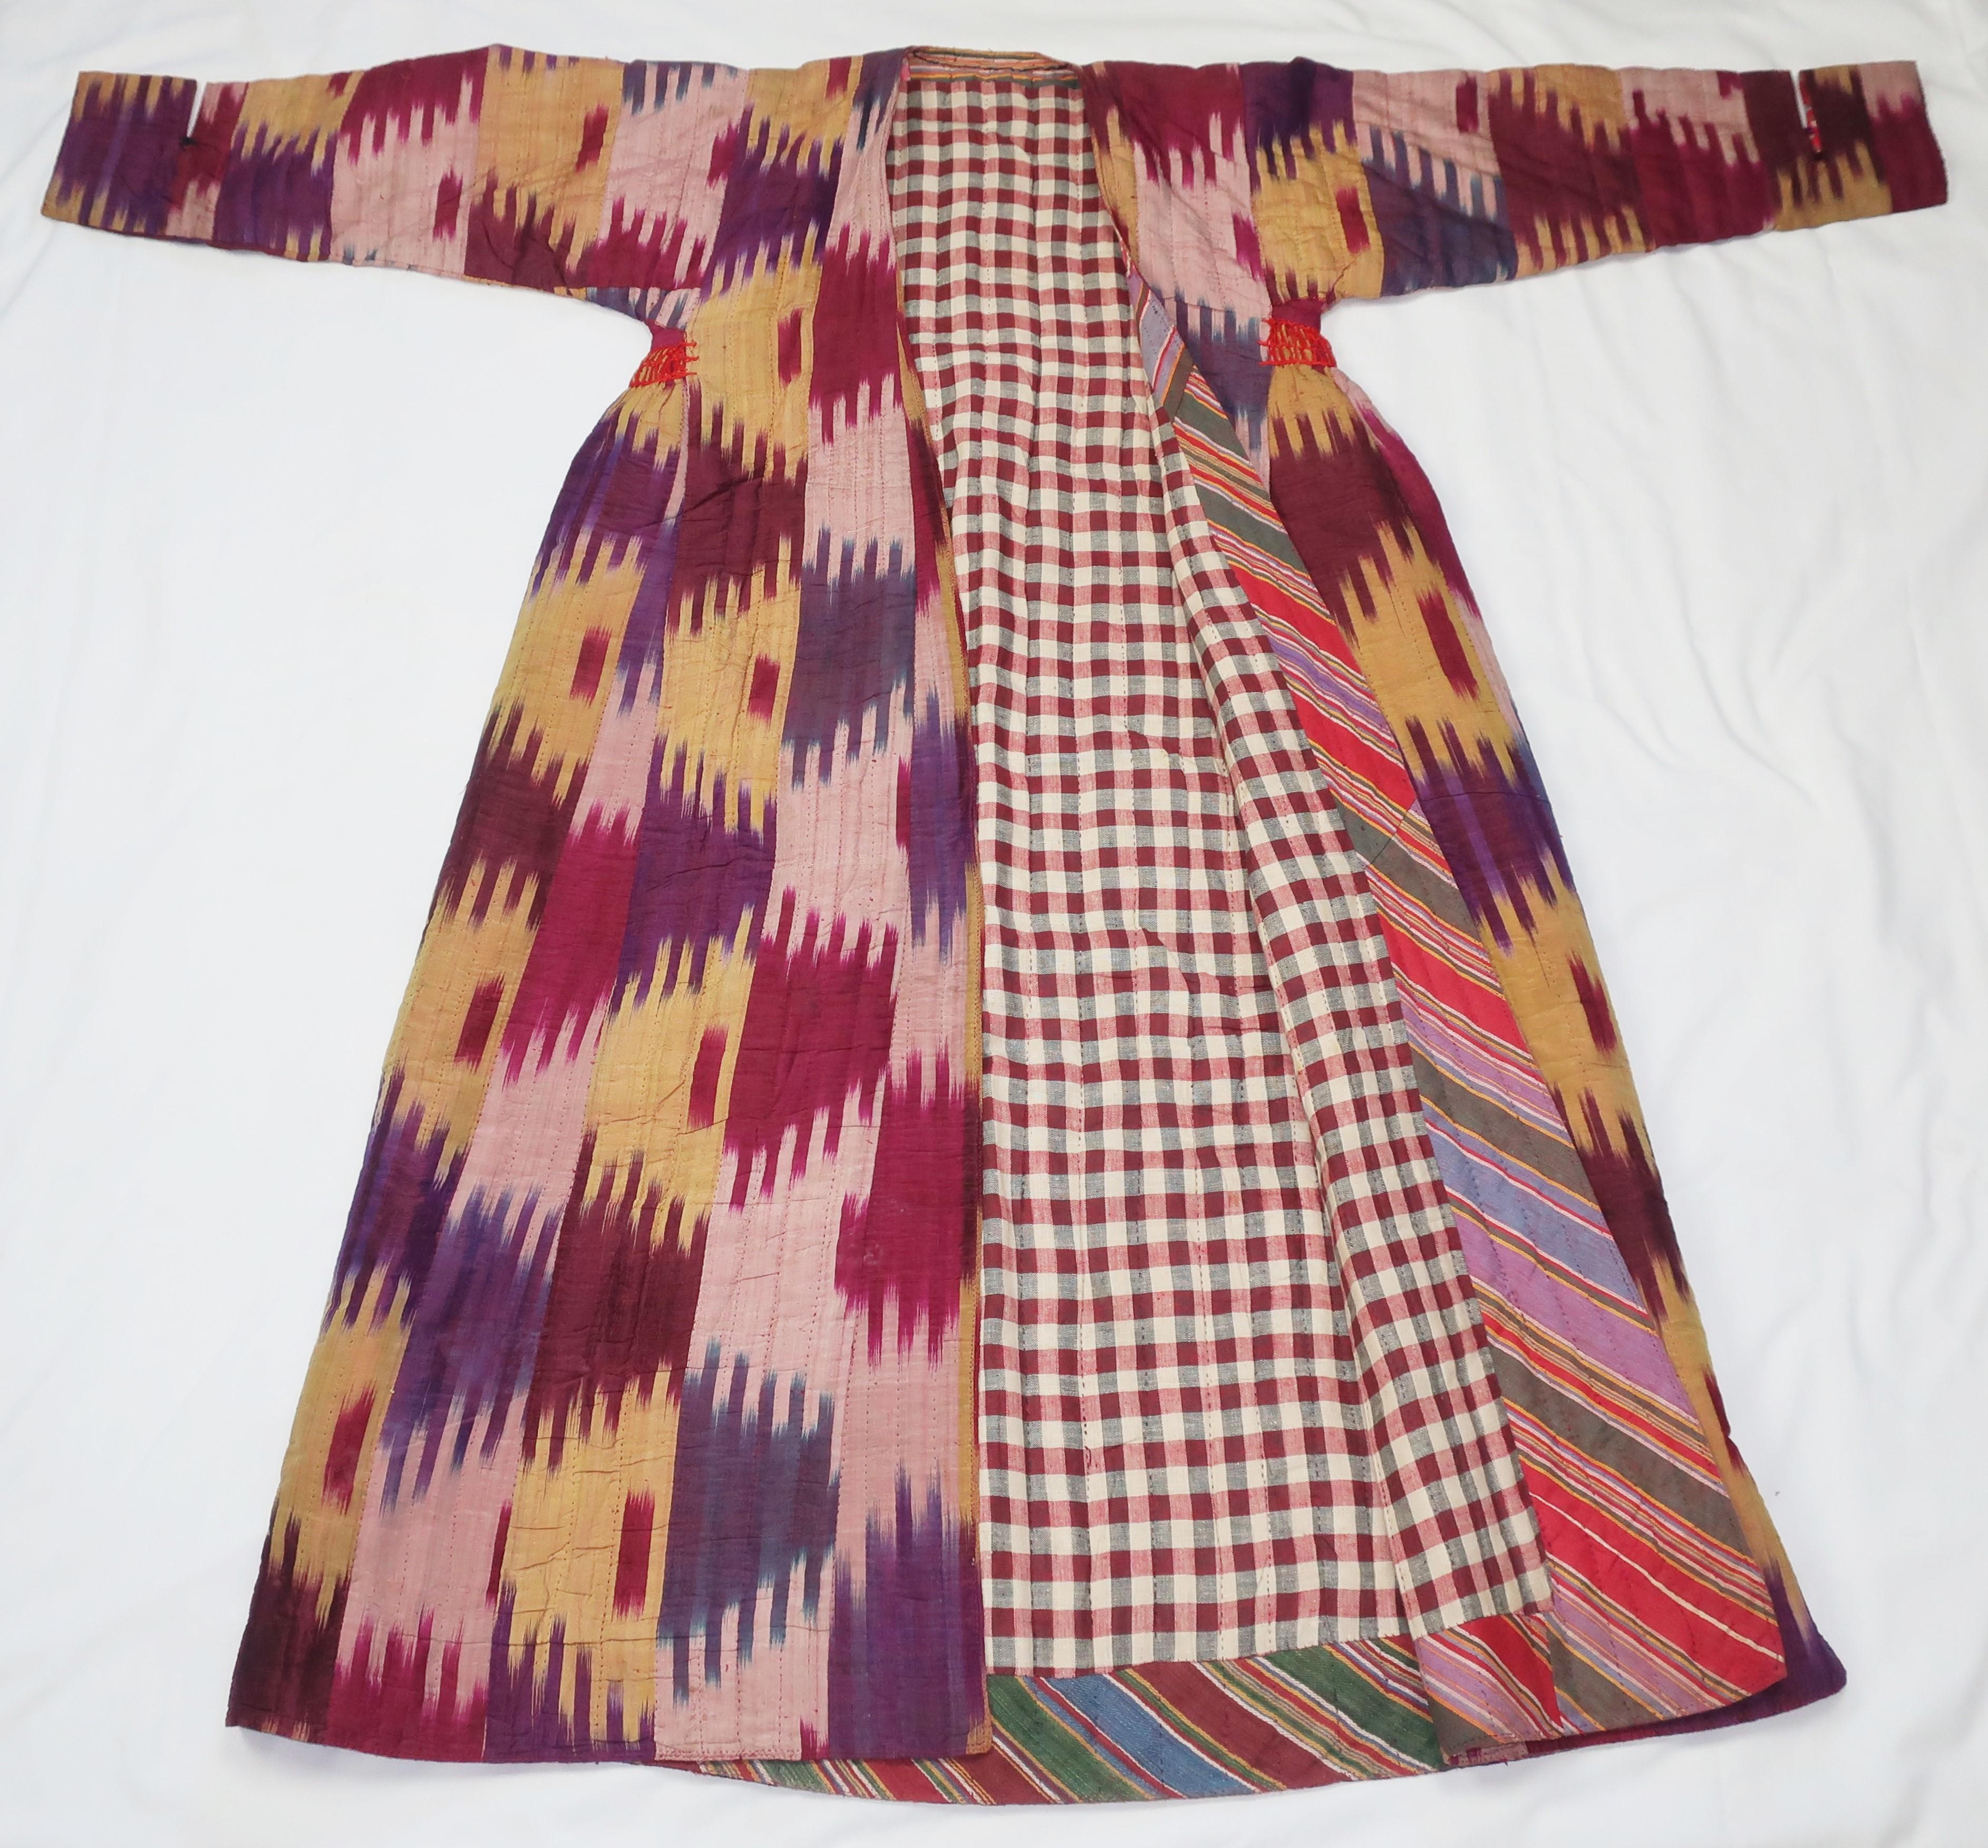 A beautiful early to mid 20th Century quilted silk woman's robe from the Mazar-i-Sharif region of Northern Afghanistan, Central Asia.  The robe is in a traditional Ikat pattern displaying shades of purple, aubergine, magenta, peacock blue, pale